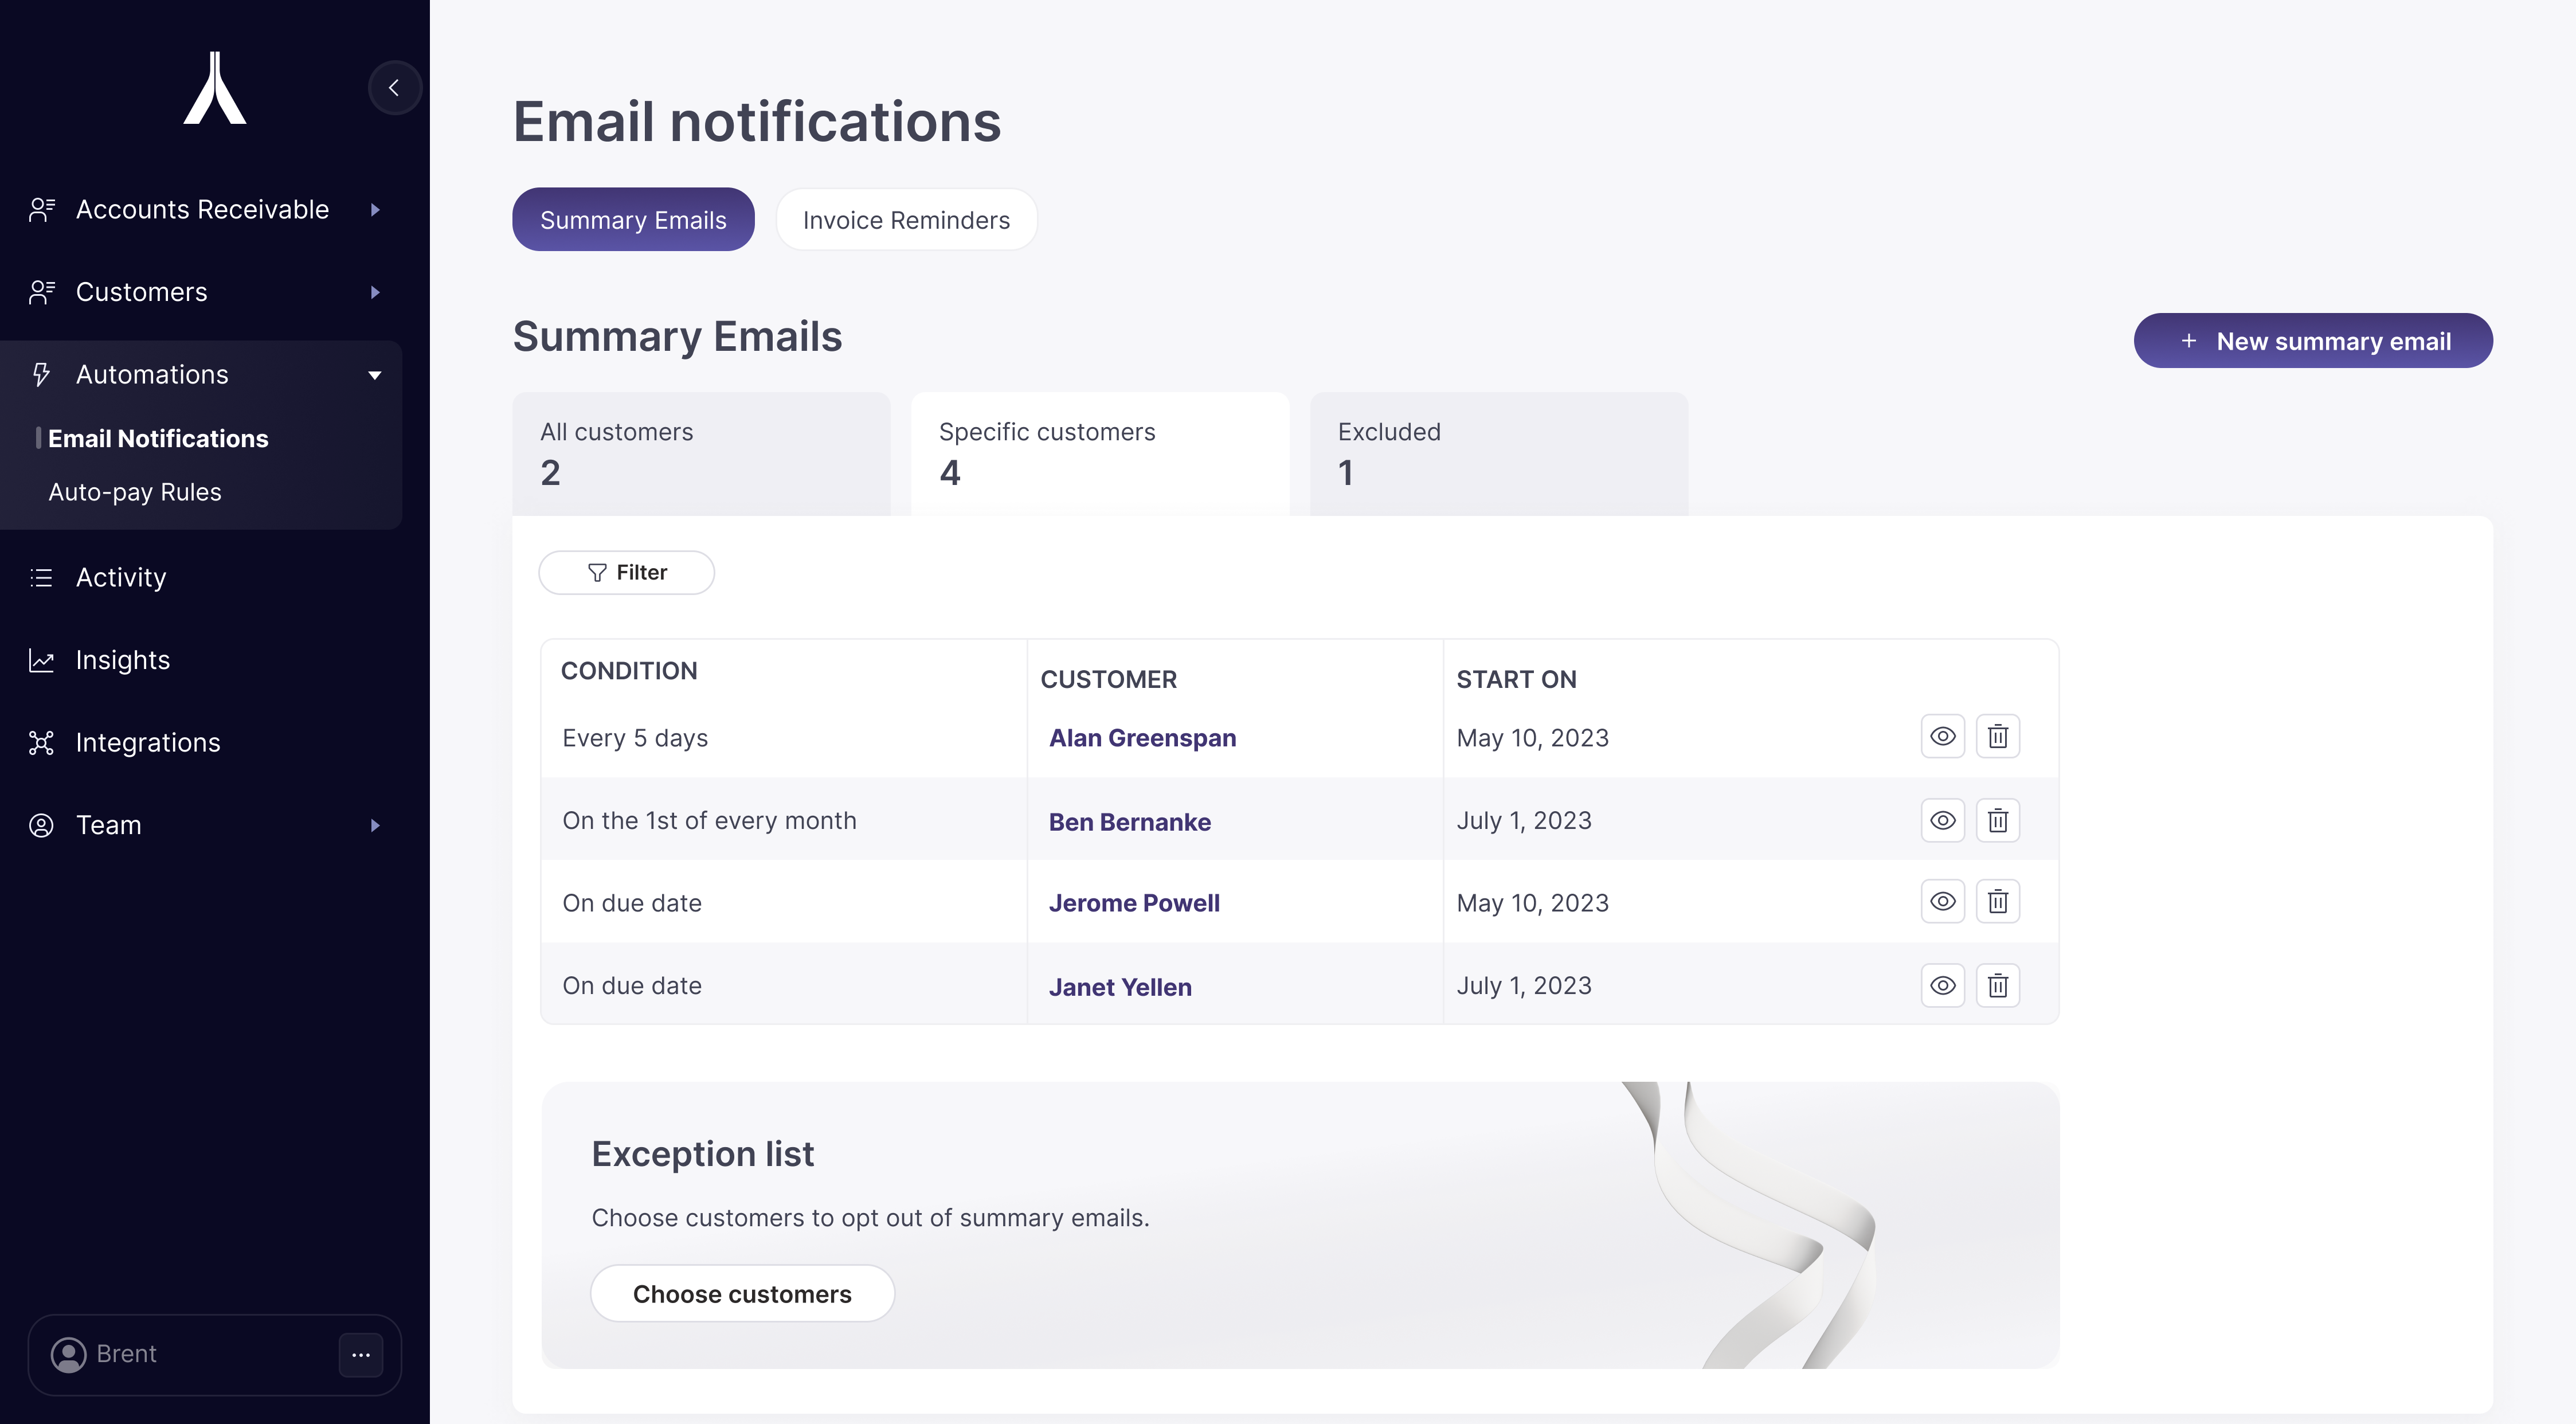 Utilize key features like email notifications to help remind customers of upcoming invoice due dates on a general or customer specific basis. Set specific dates for reminders or amounts - up to you.